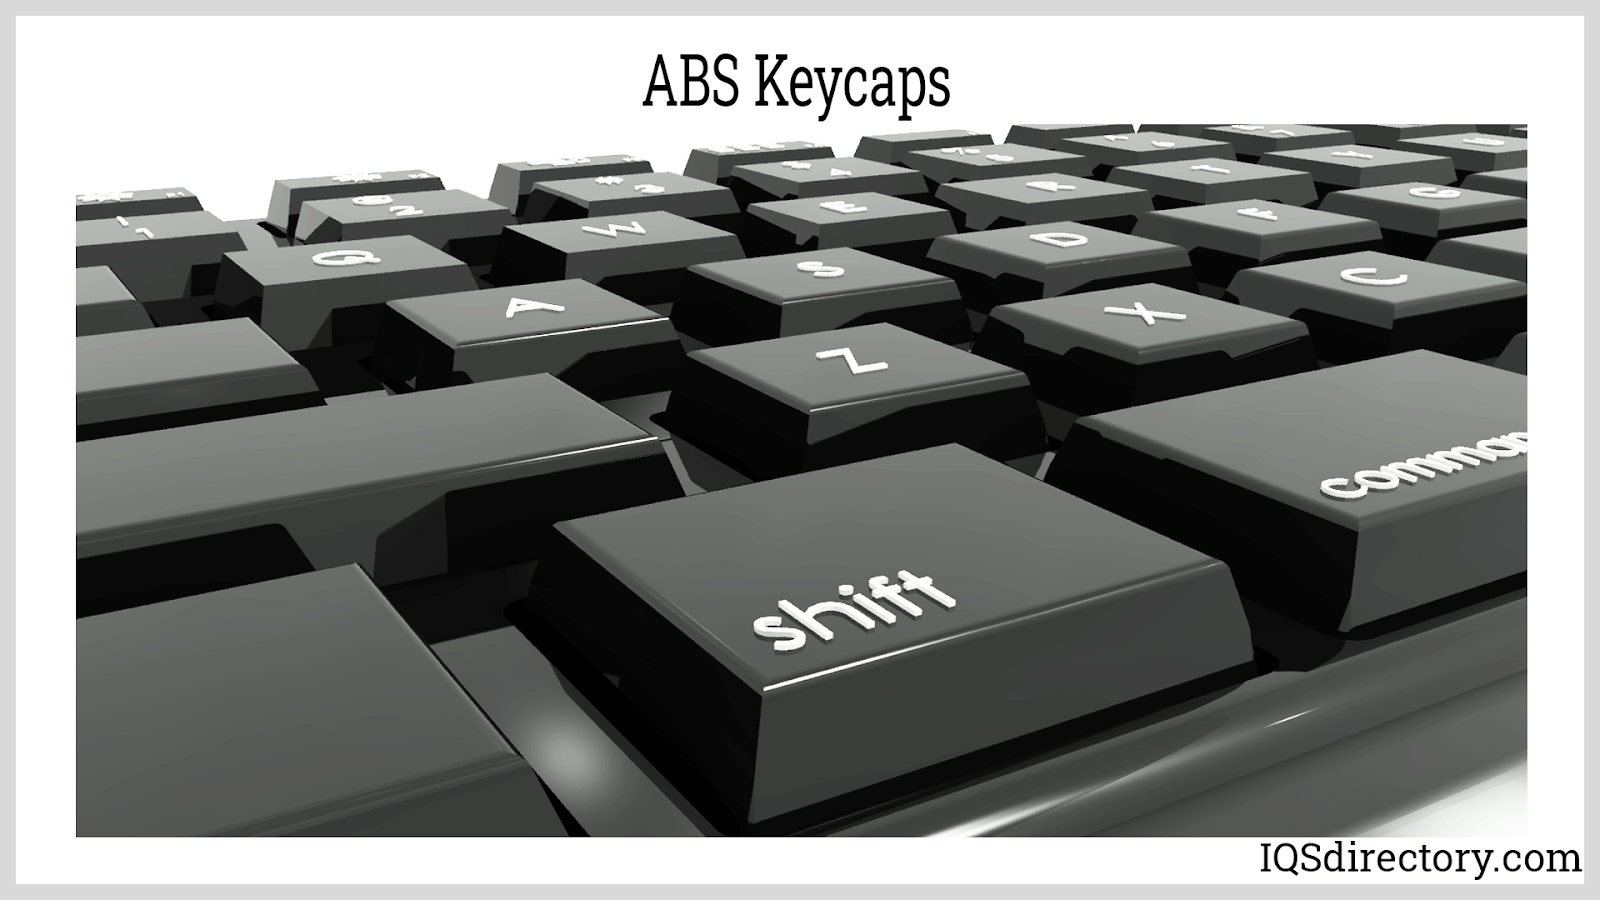 ABS Keycaps